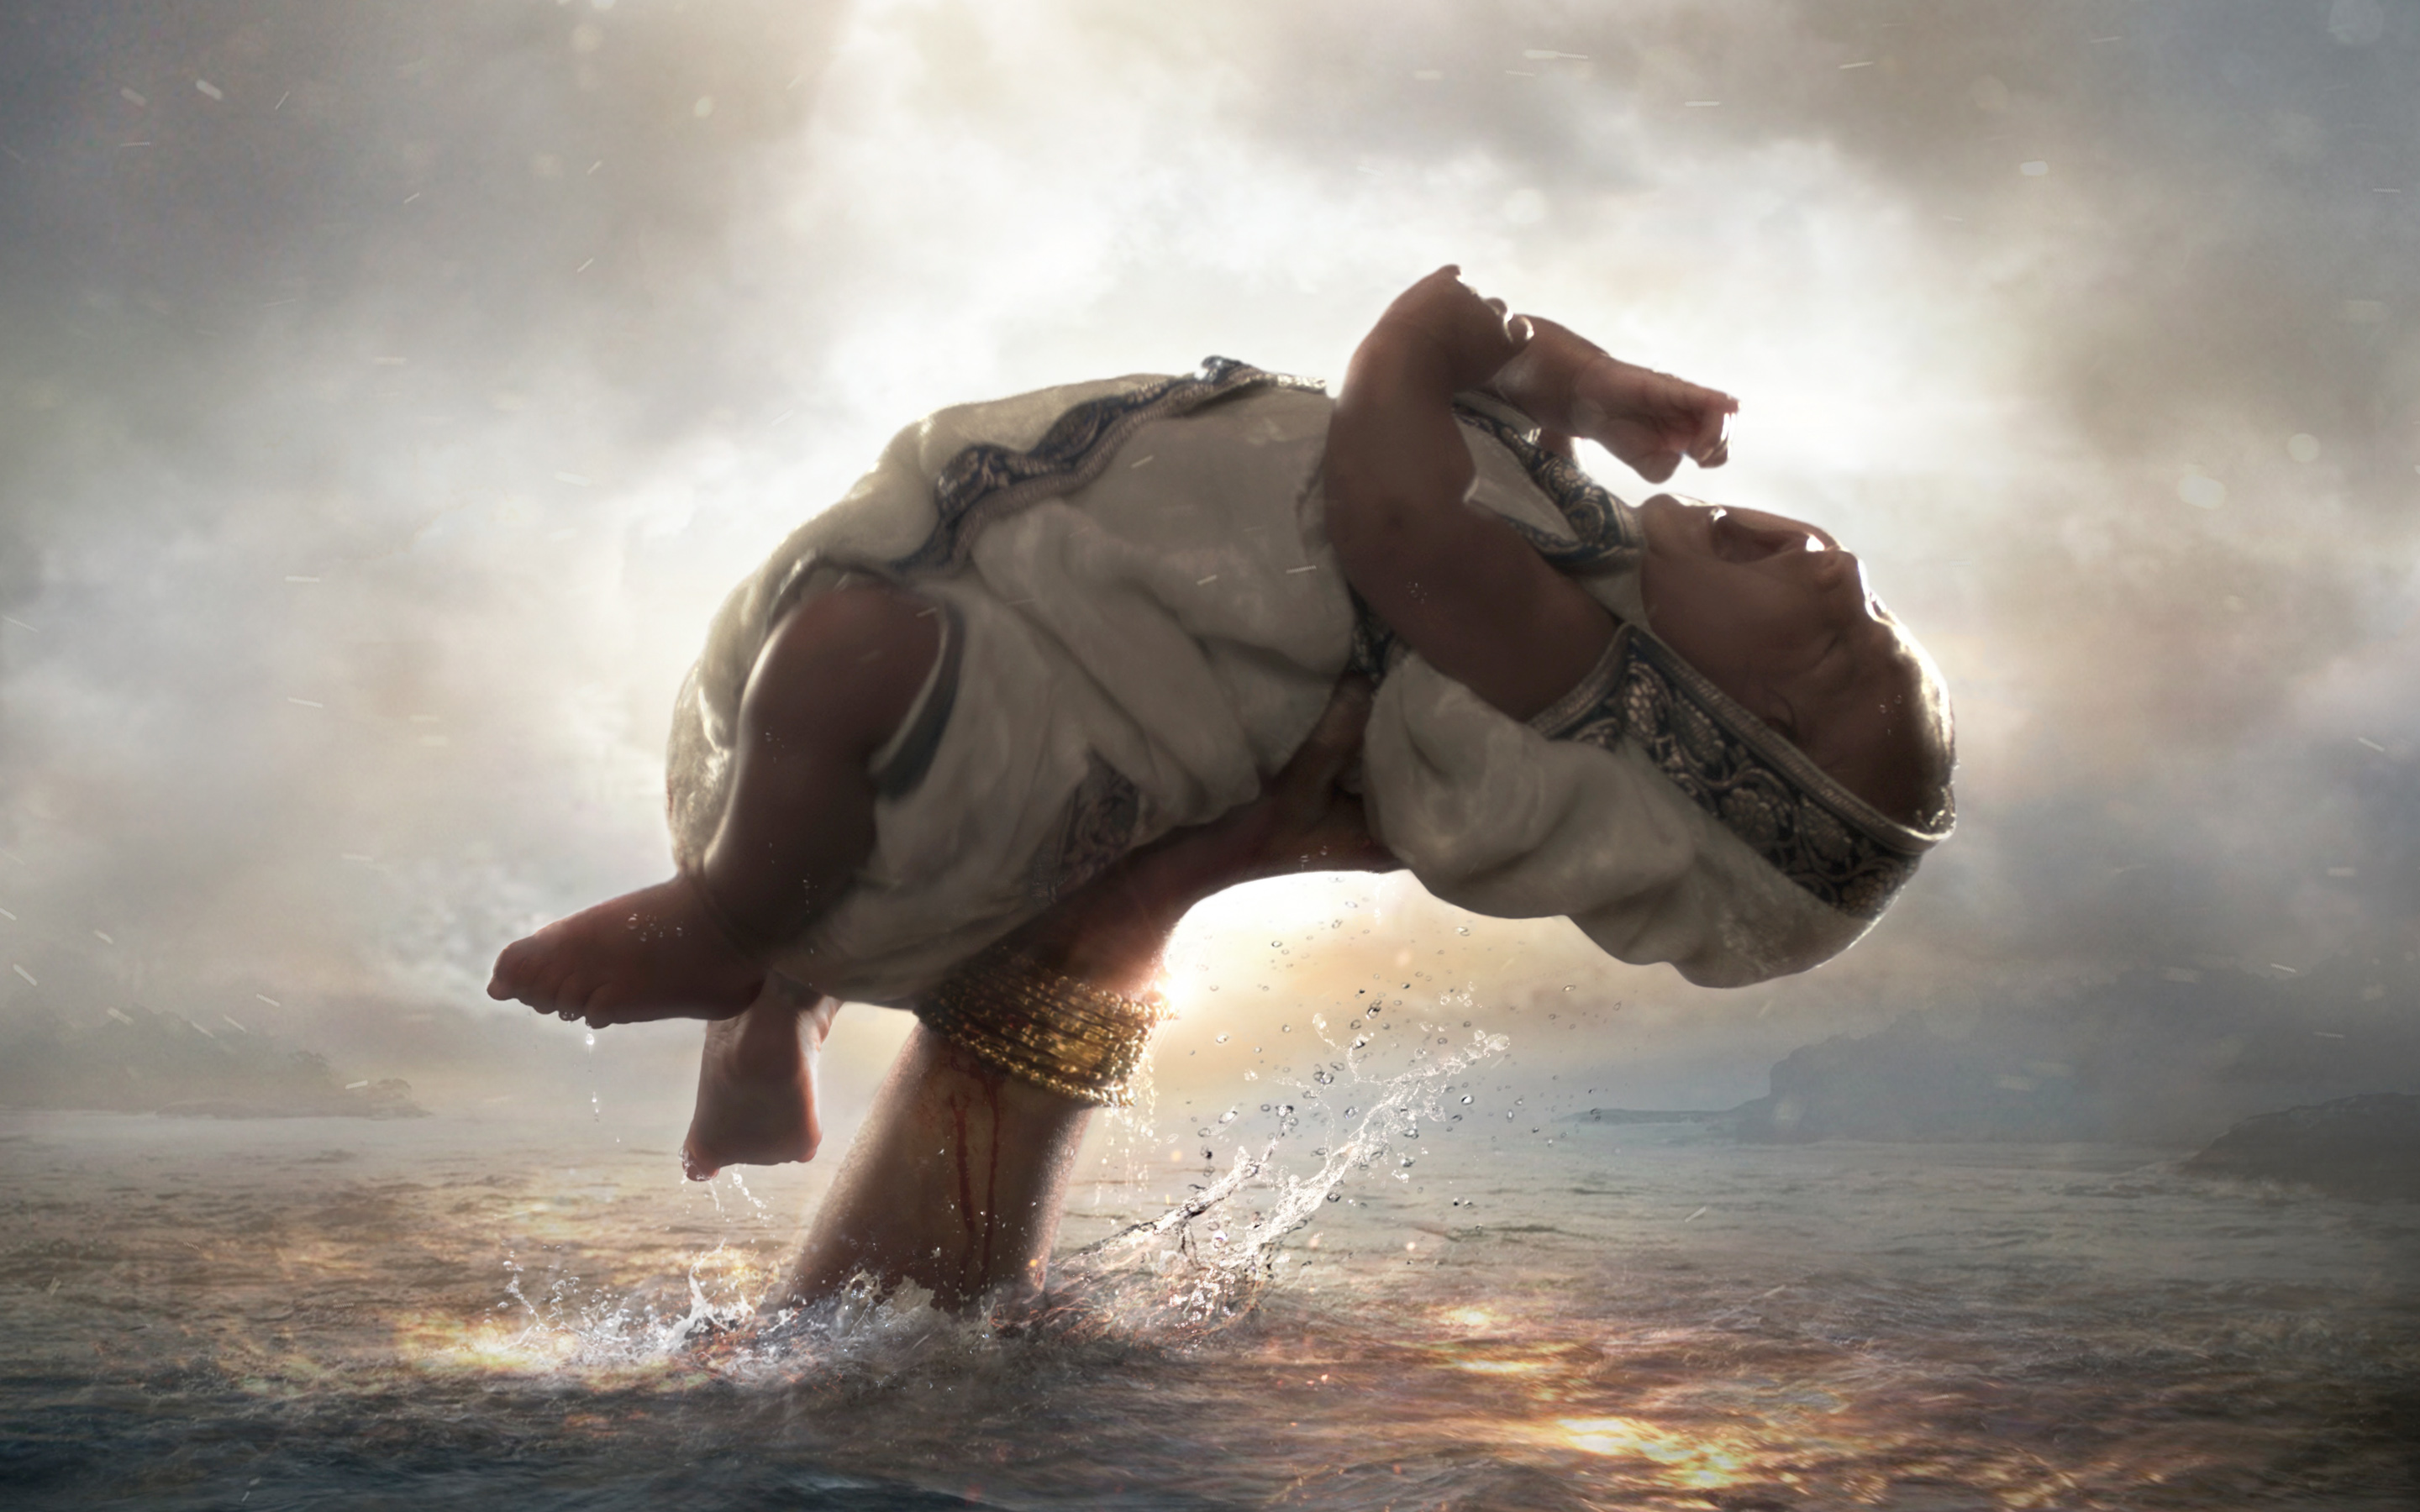 bahubali wallpapers, photos and desktop backgrounds up to ...